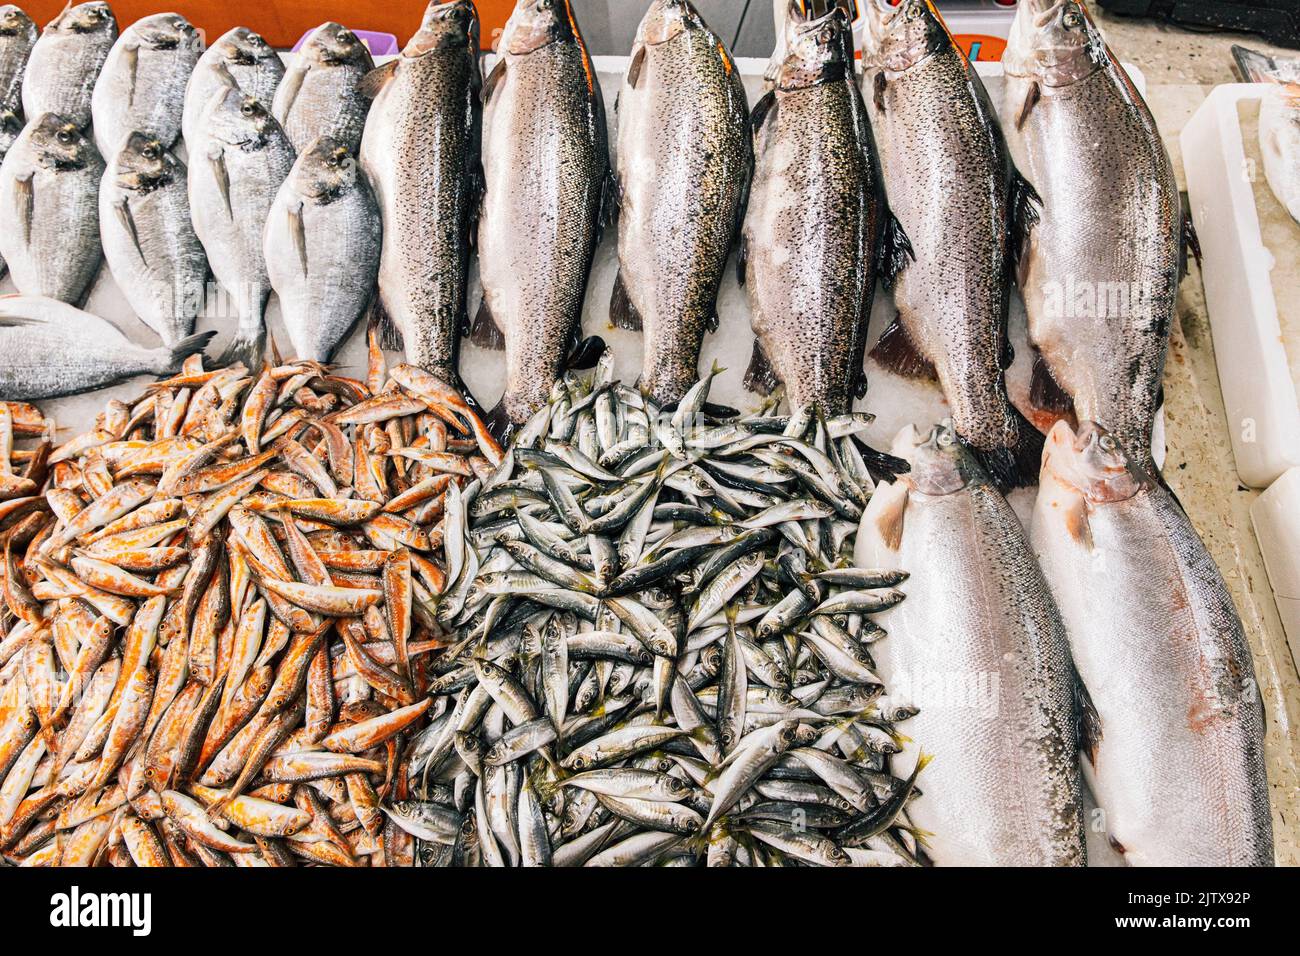 Fresh Sea Salmon, European Anchovy Fish and Mullus On Display On Ice On Market Store Shop. Seafood Fish Background. Salmon Is A Fairly Species Of Stock Photo